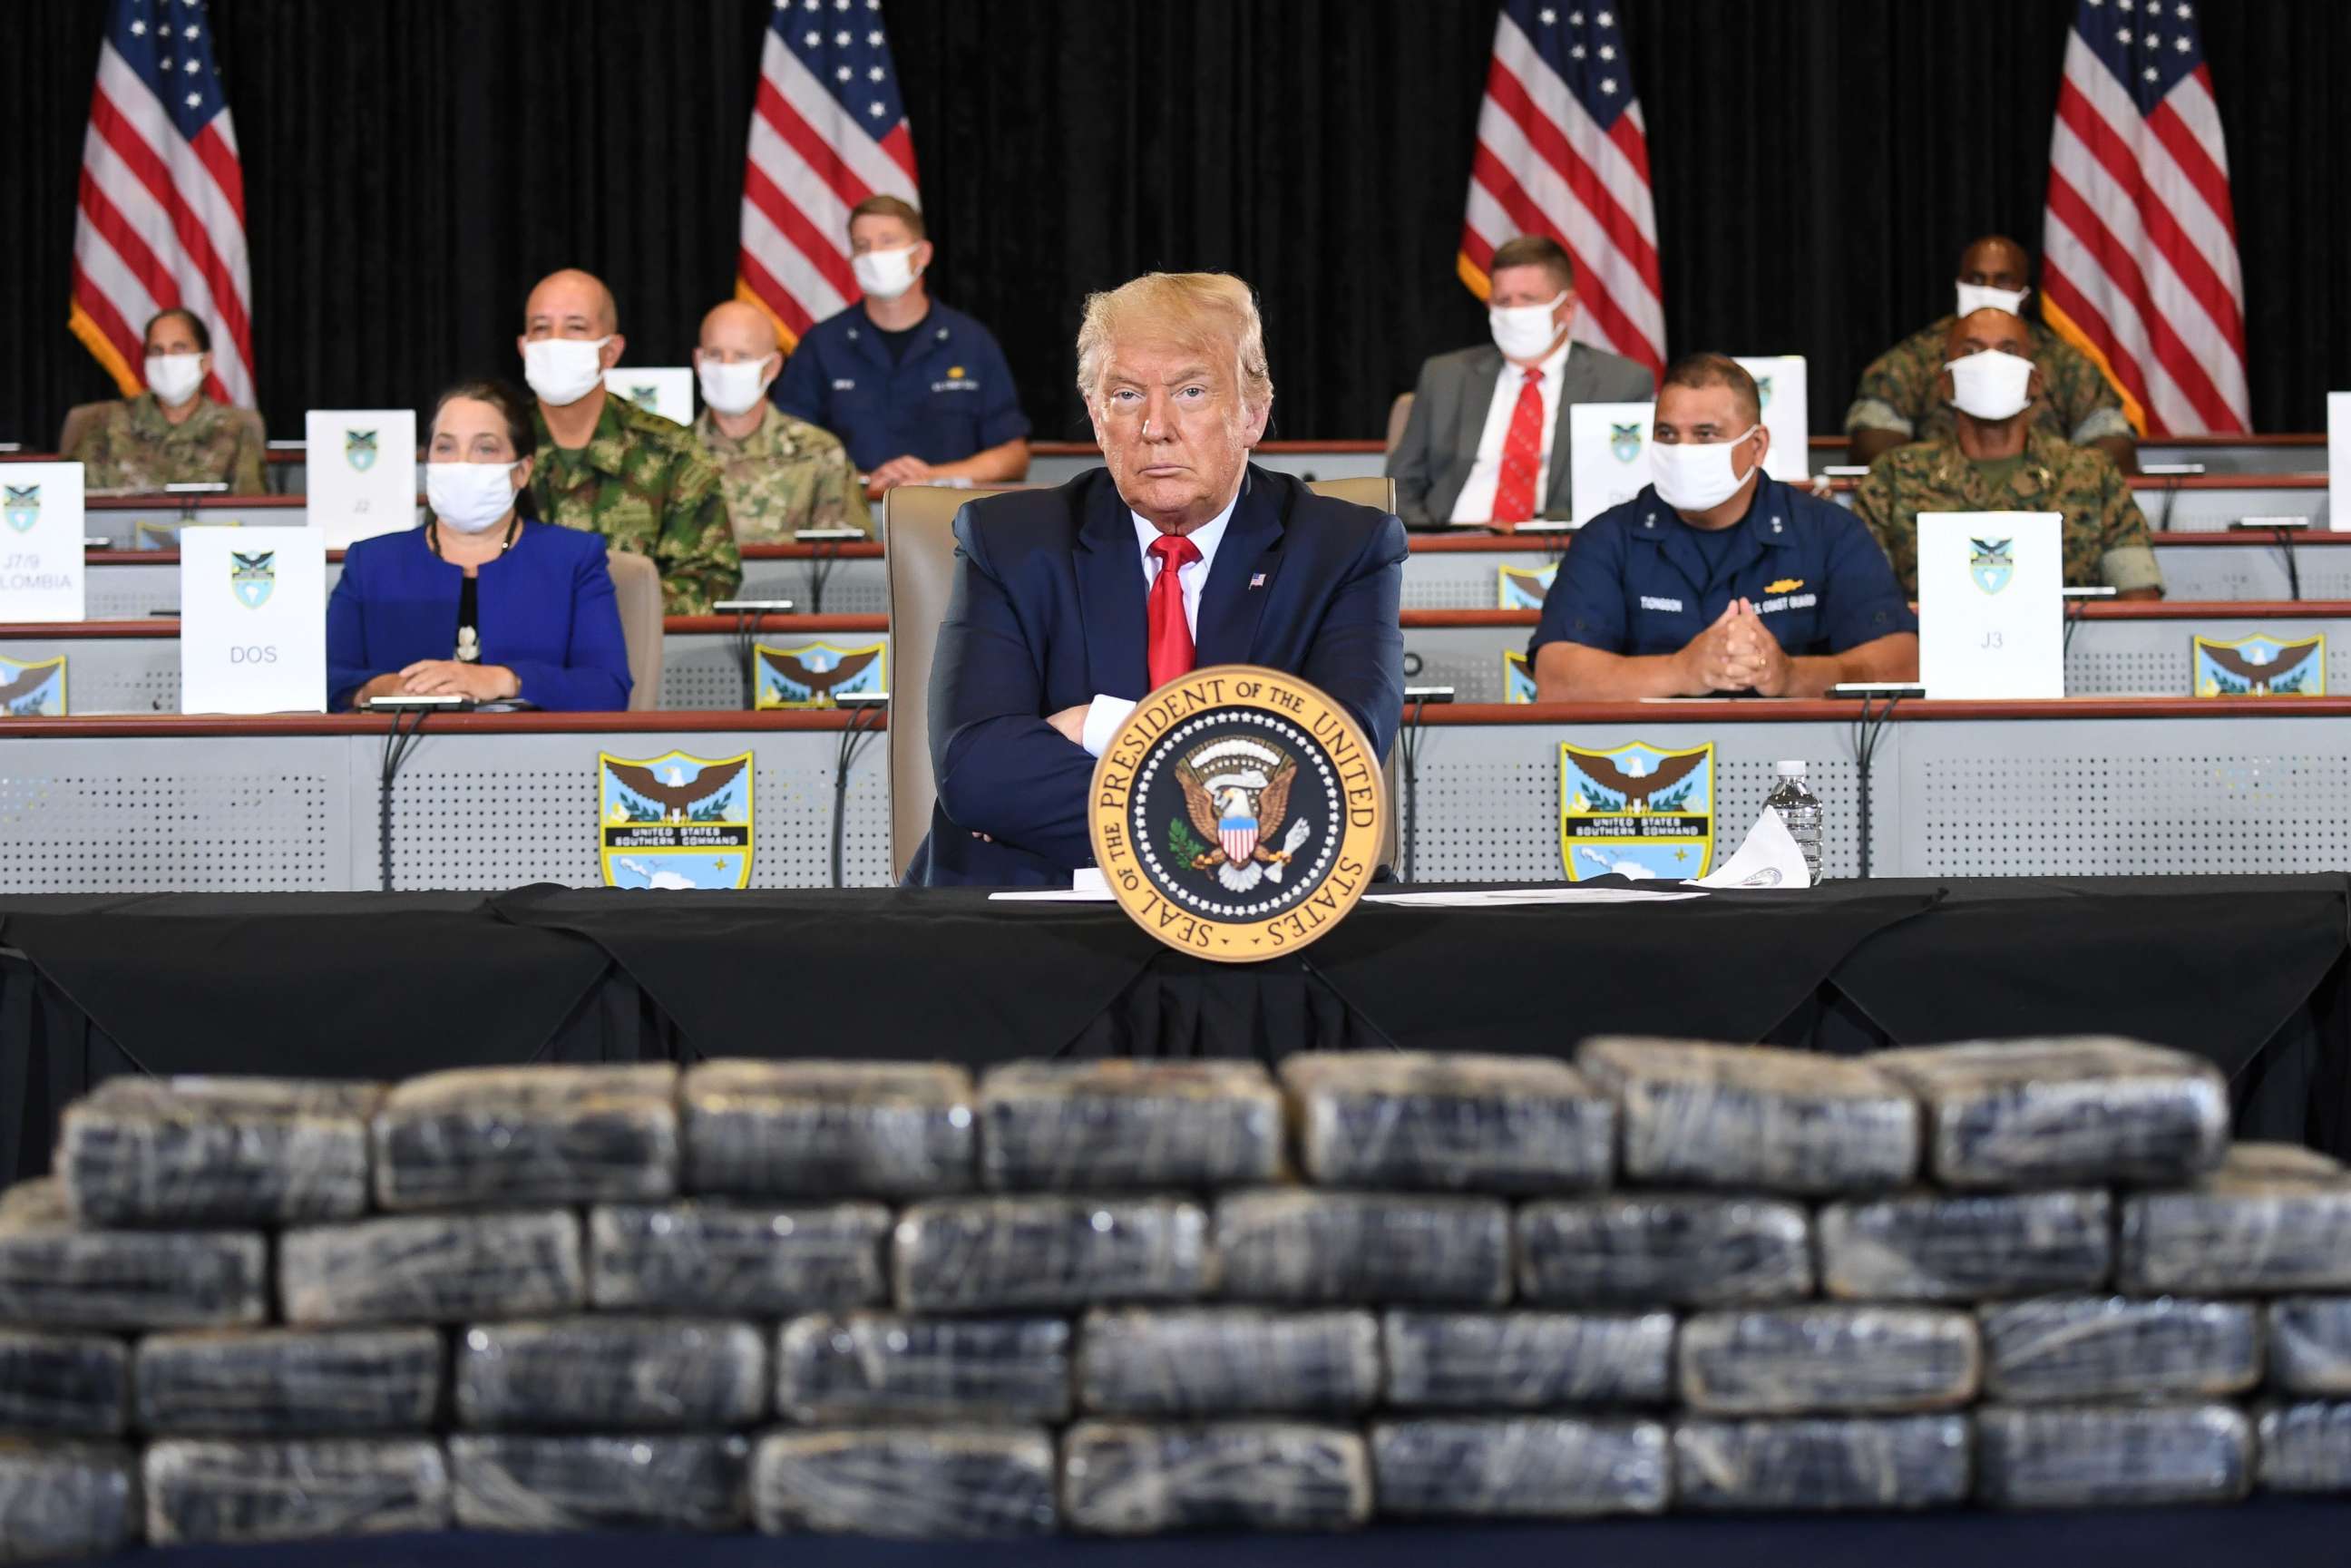 PHOTO: President Donald Trump attends a briefing on Enhanced Narcotics Operations at the US Southern Command in Doral, Florida, on July 10, 2020.